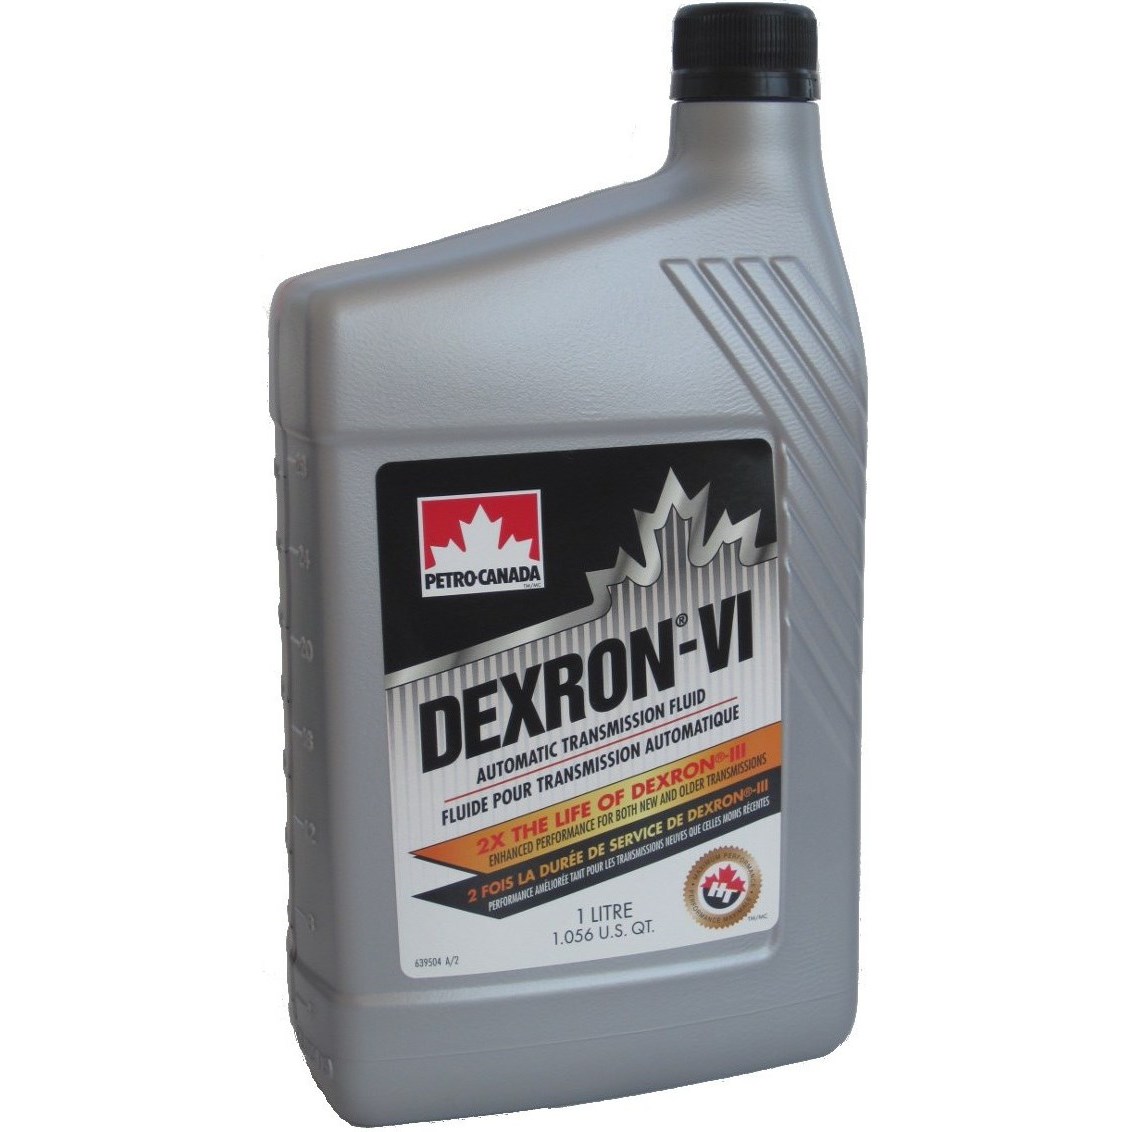 Canada atf. Масло Petro Canada ATF d3m. ATF Dexron 6. Petro Canada Dexron vi. Масло АКПП Петро Канада декстрон 6.